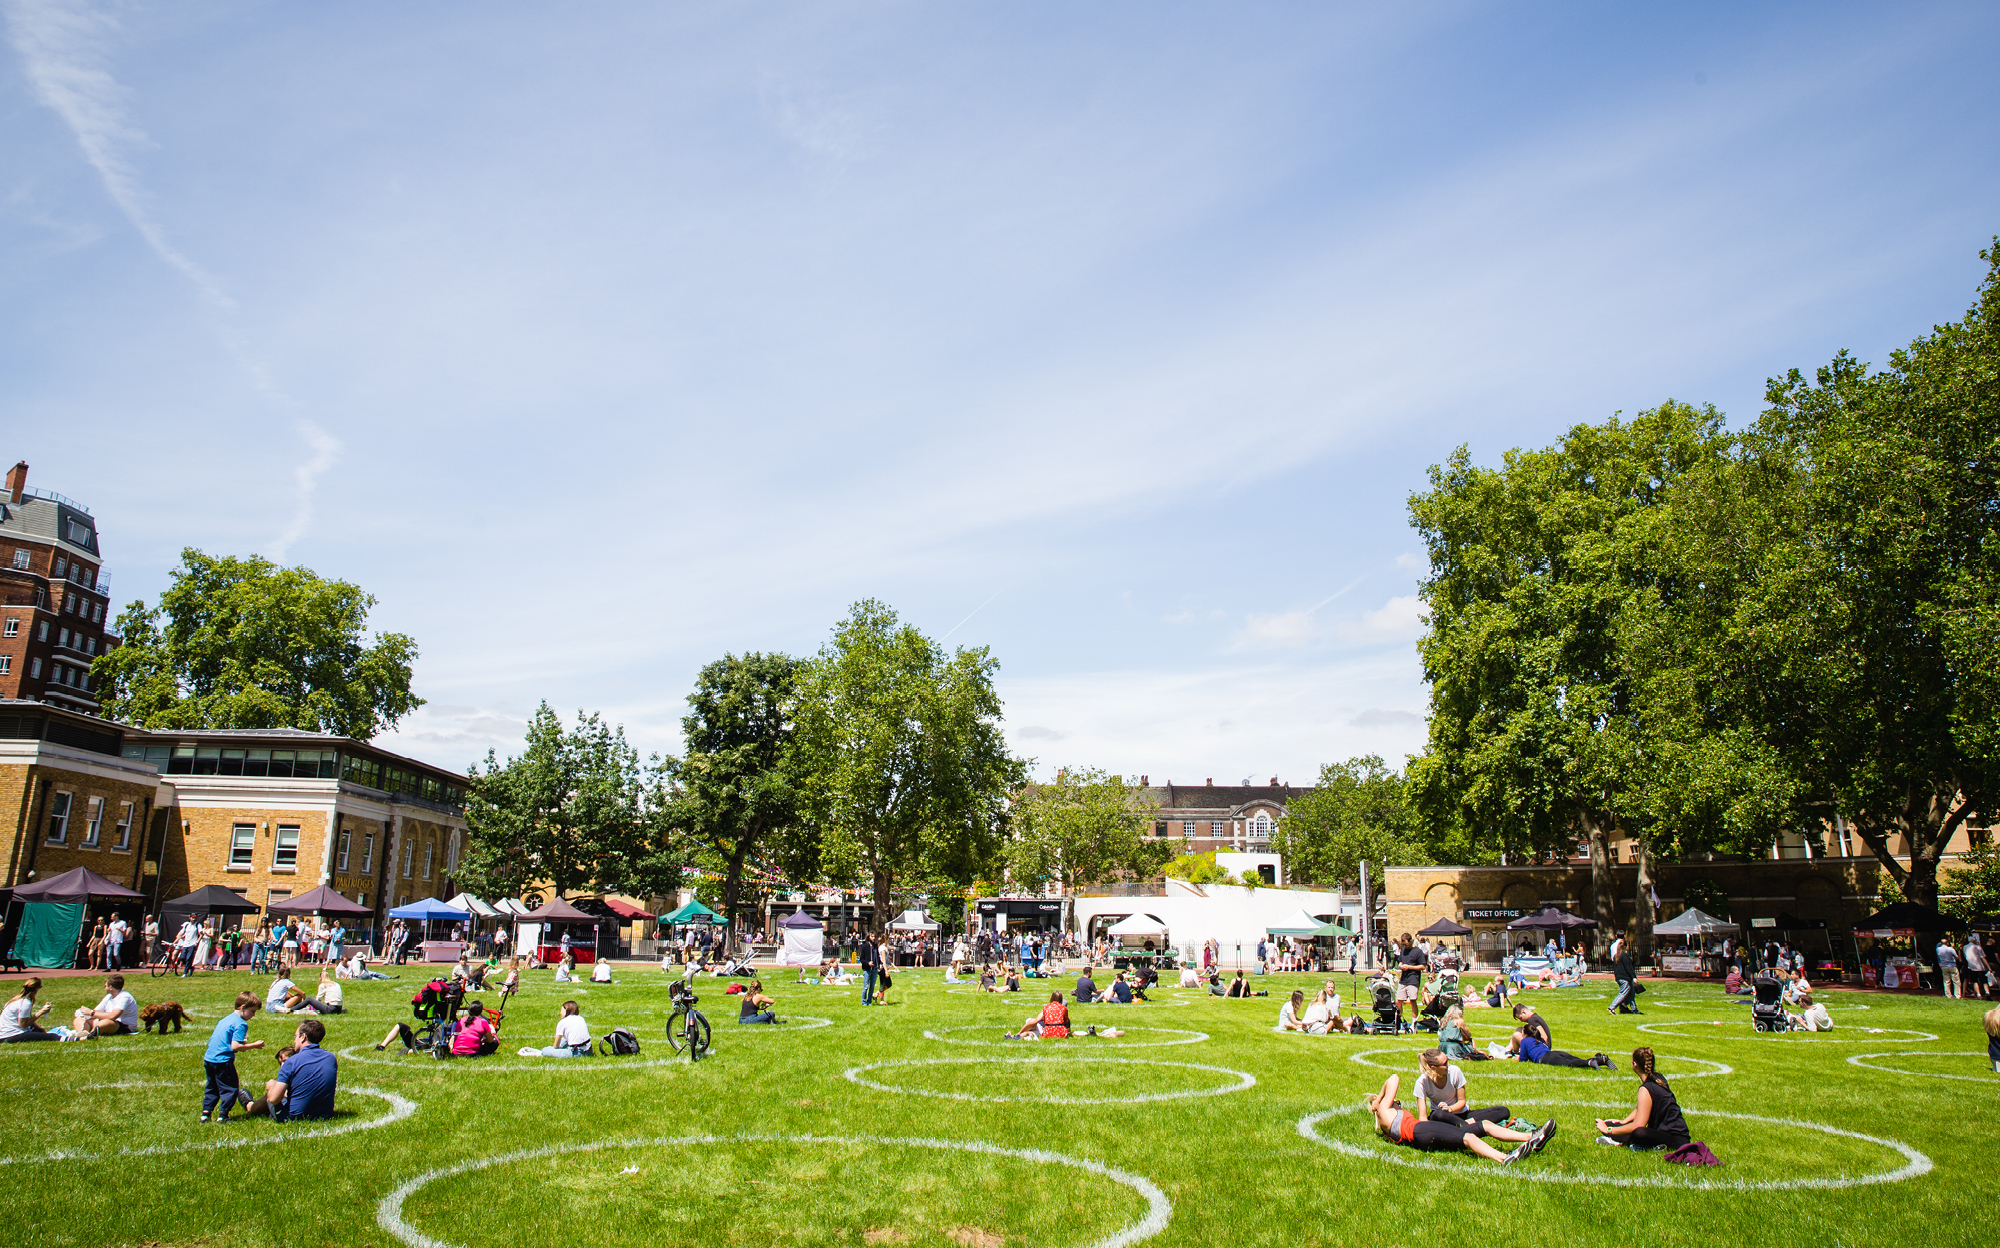 Chelsea is home to acres of outdoor leisure and dining space